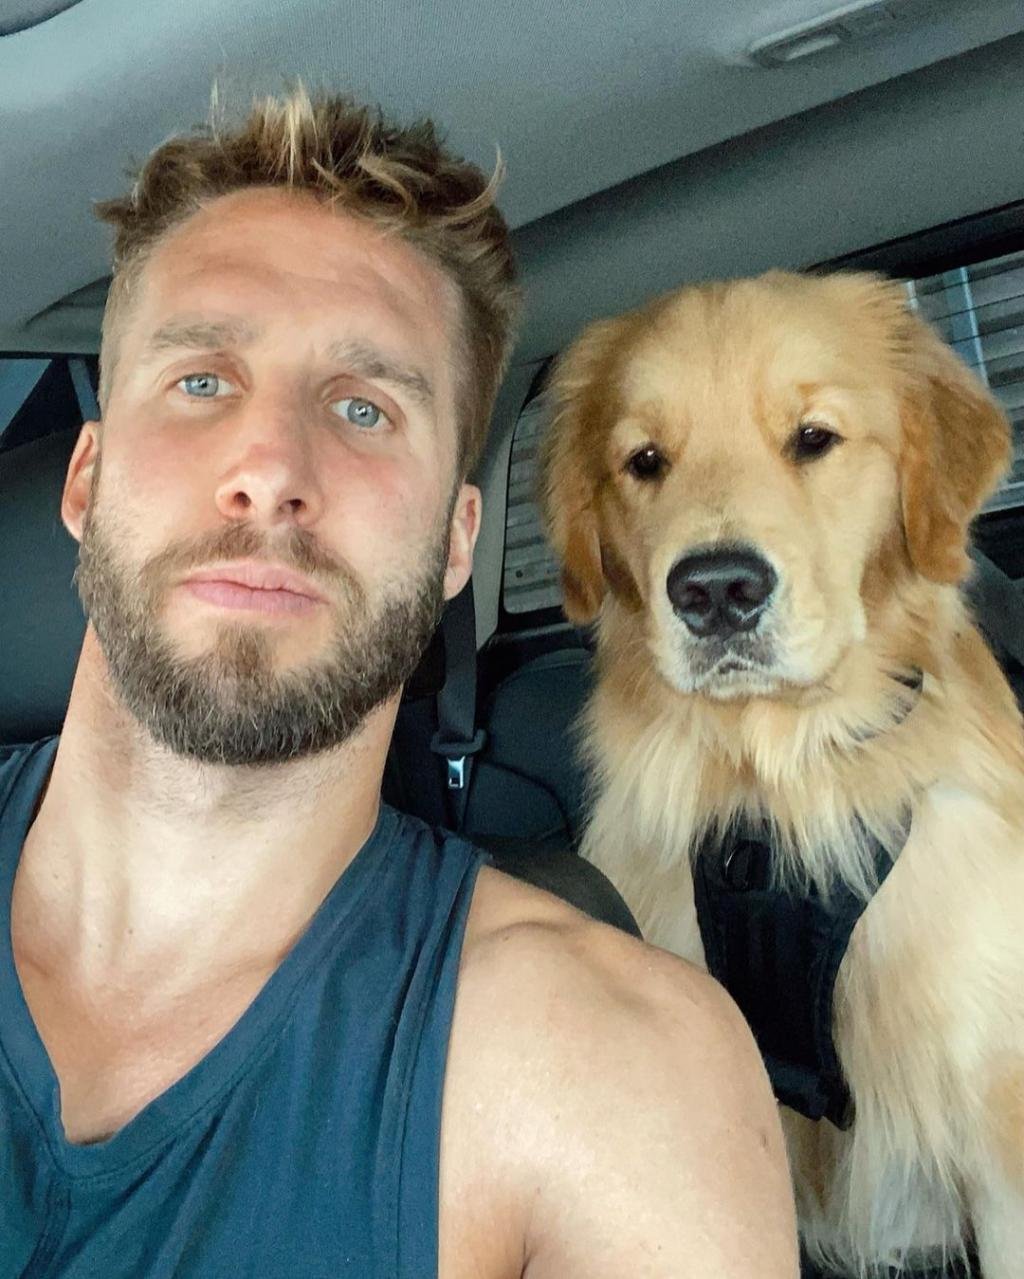 Shawn Booth and his dog.